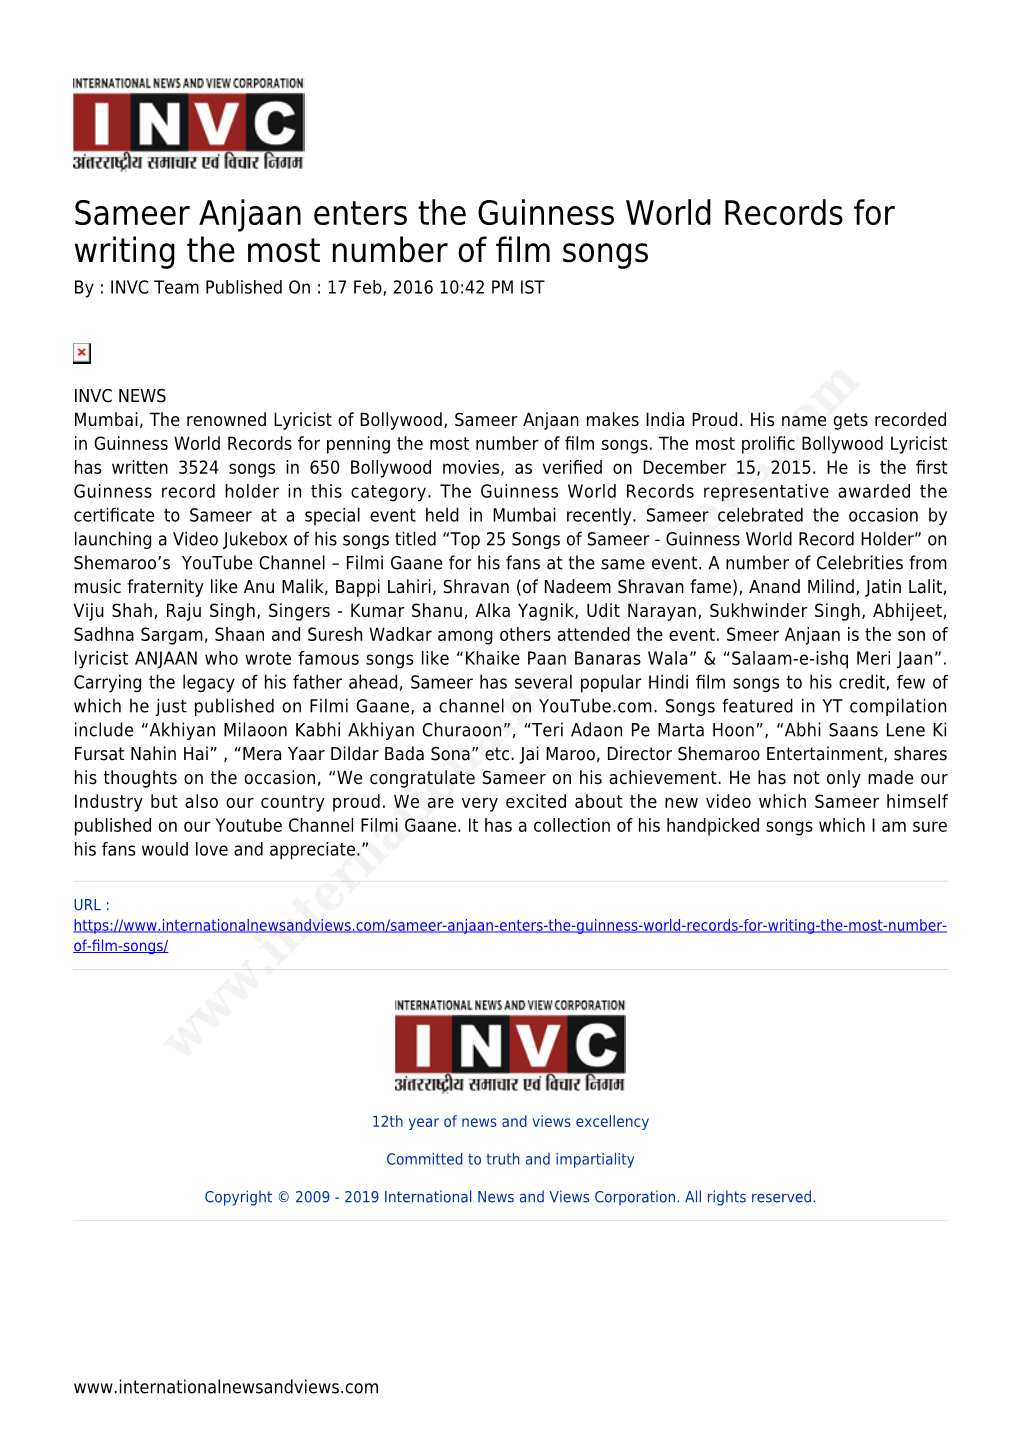 Sameer Anjaan Enters the Guinness World Records for Writing the Most Number of ﬁlm Songs by : INVC Team Published on : 17 Feb, 2016 10:42 PM IST